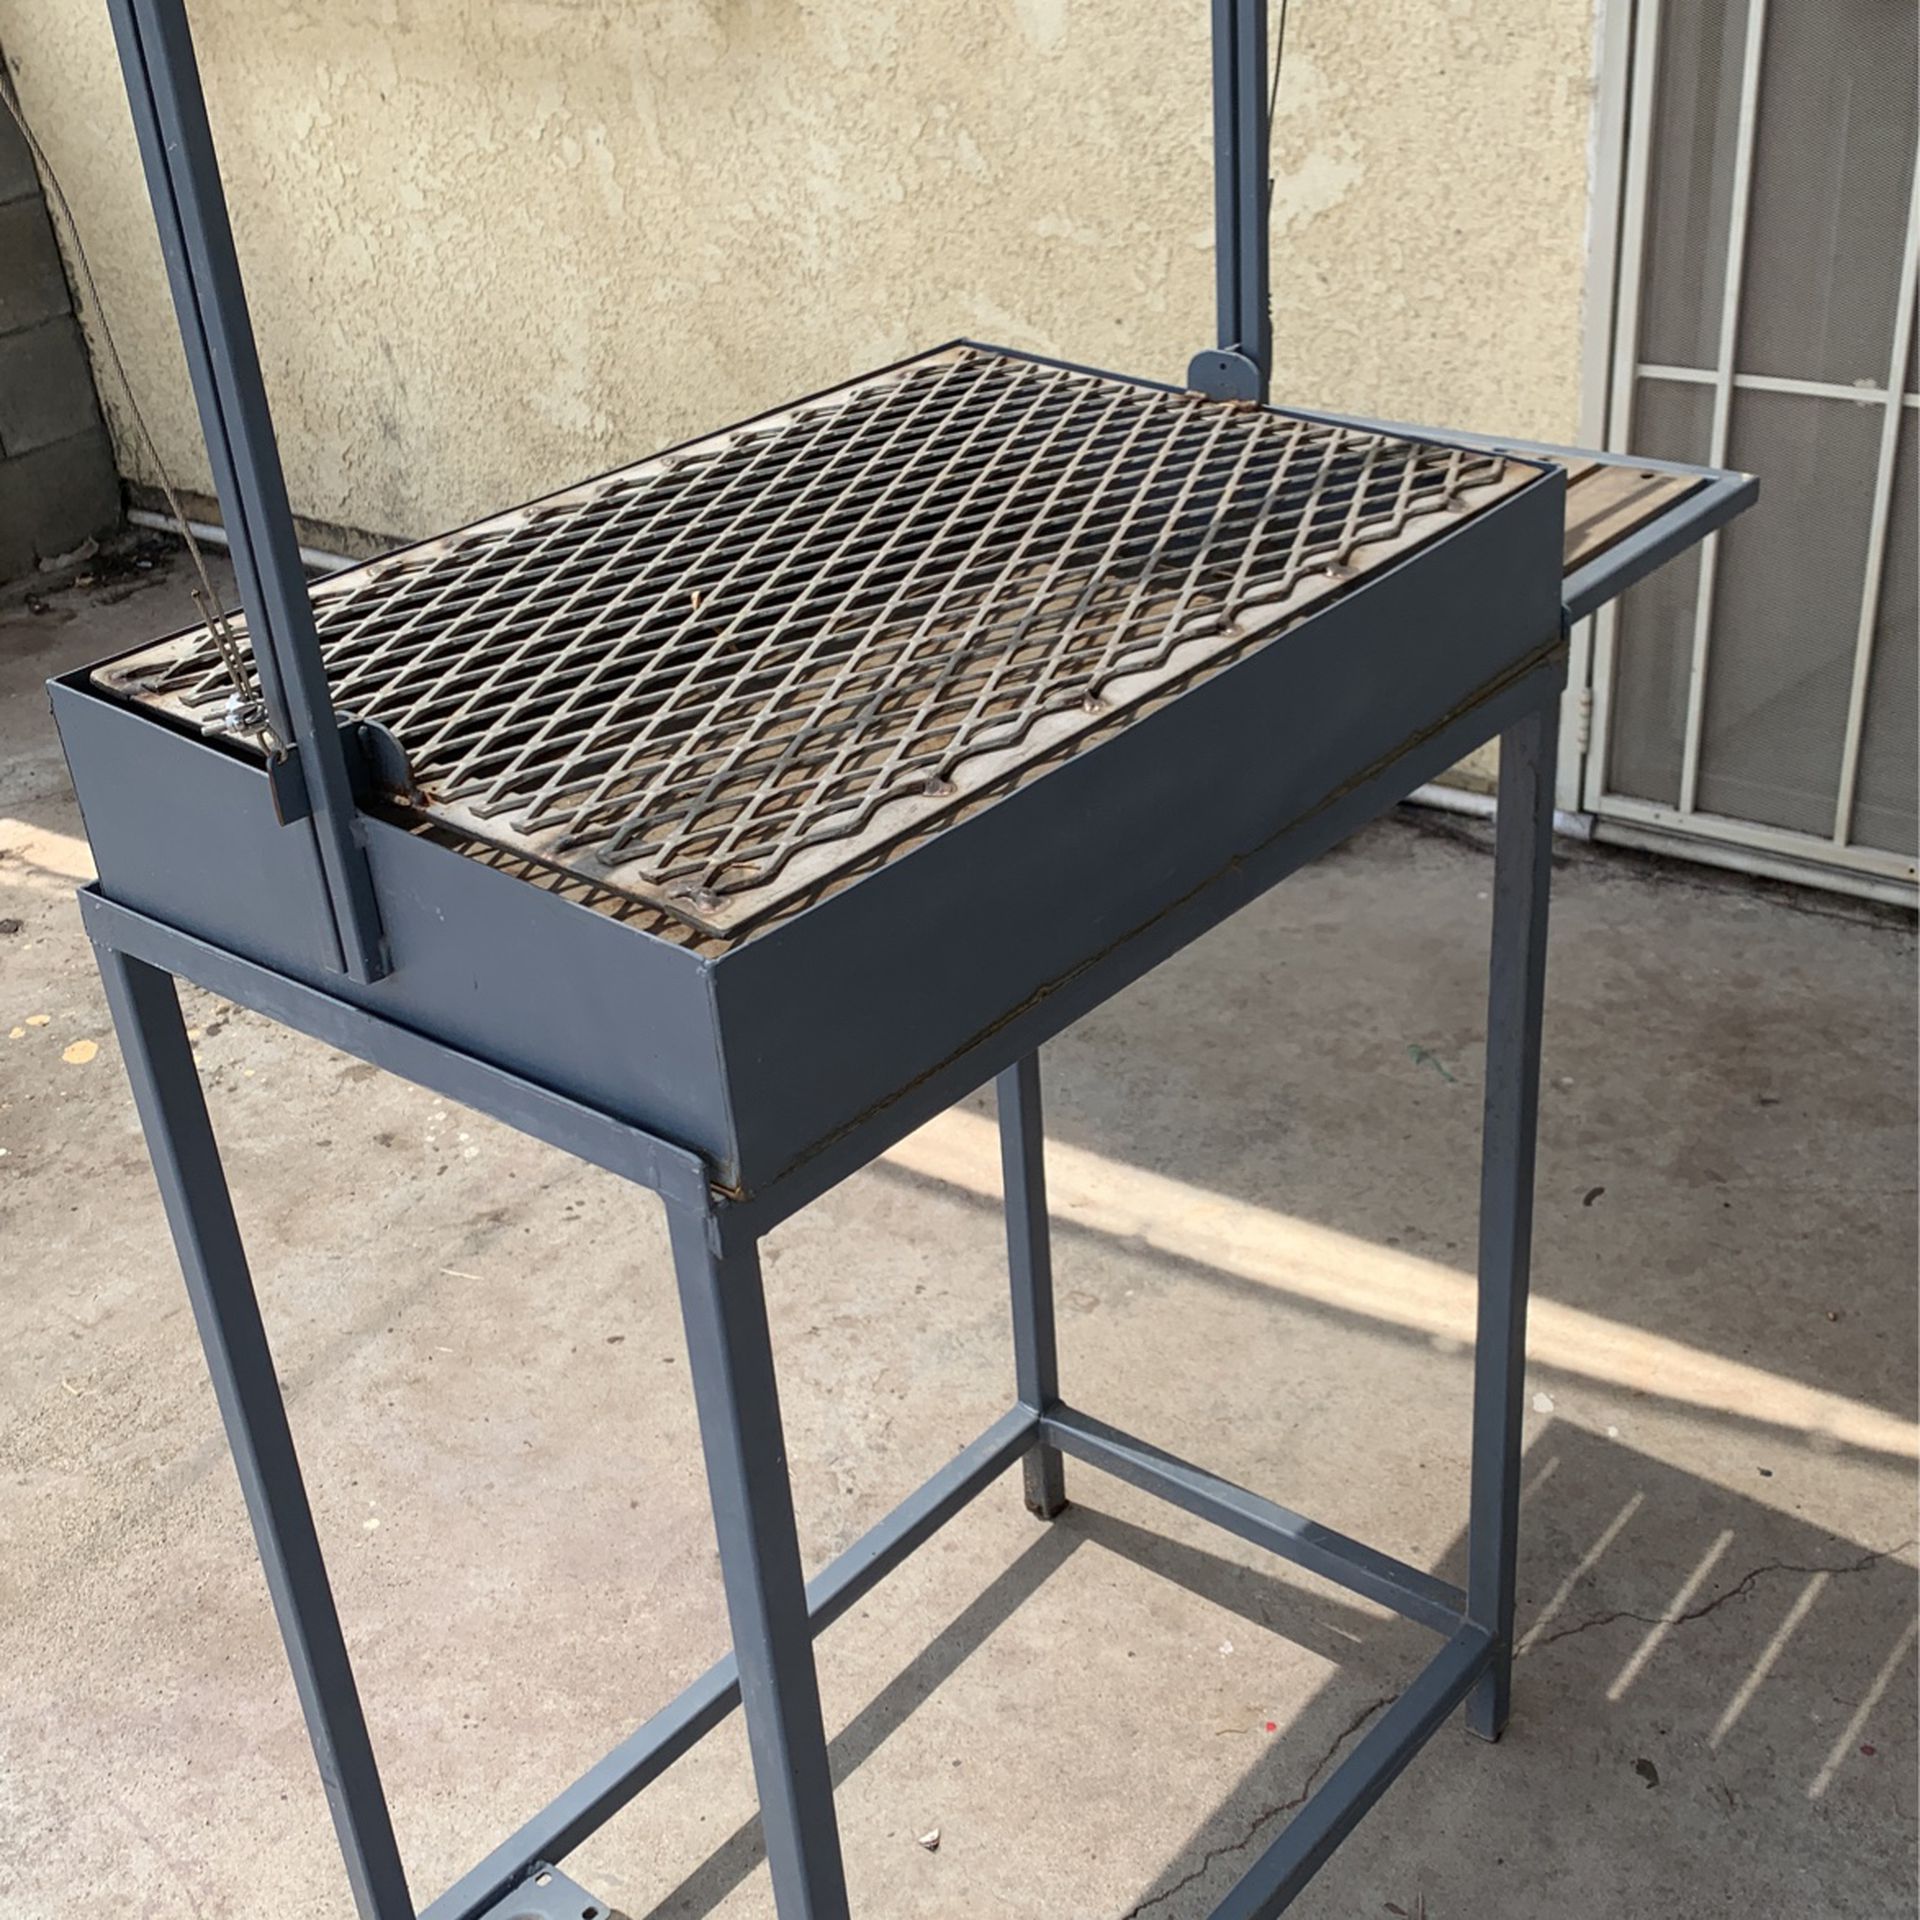 Hamilton Beach Indoor Searing Grill Brand New Never Used Still In Original  Packaging for Sale in Hemet, CA - OfferUp